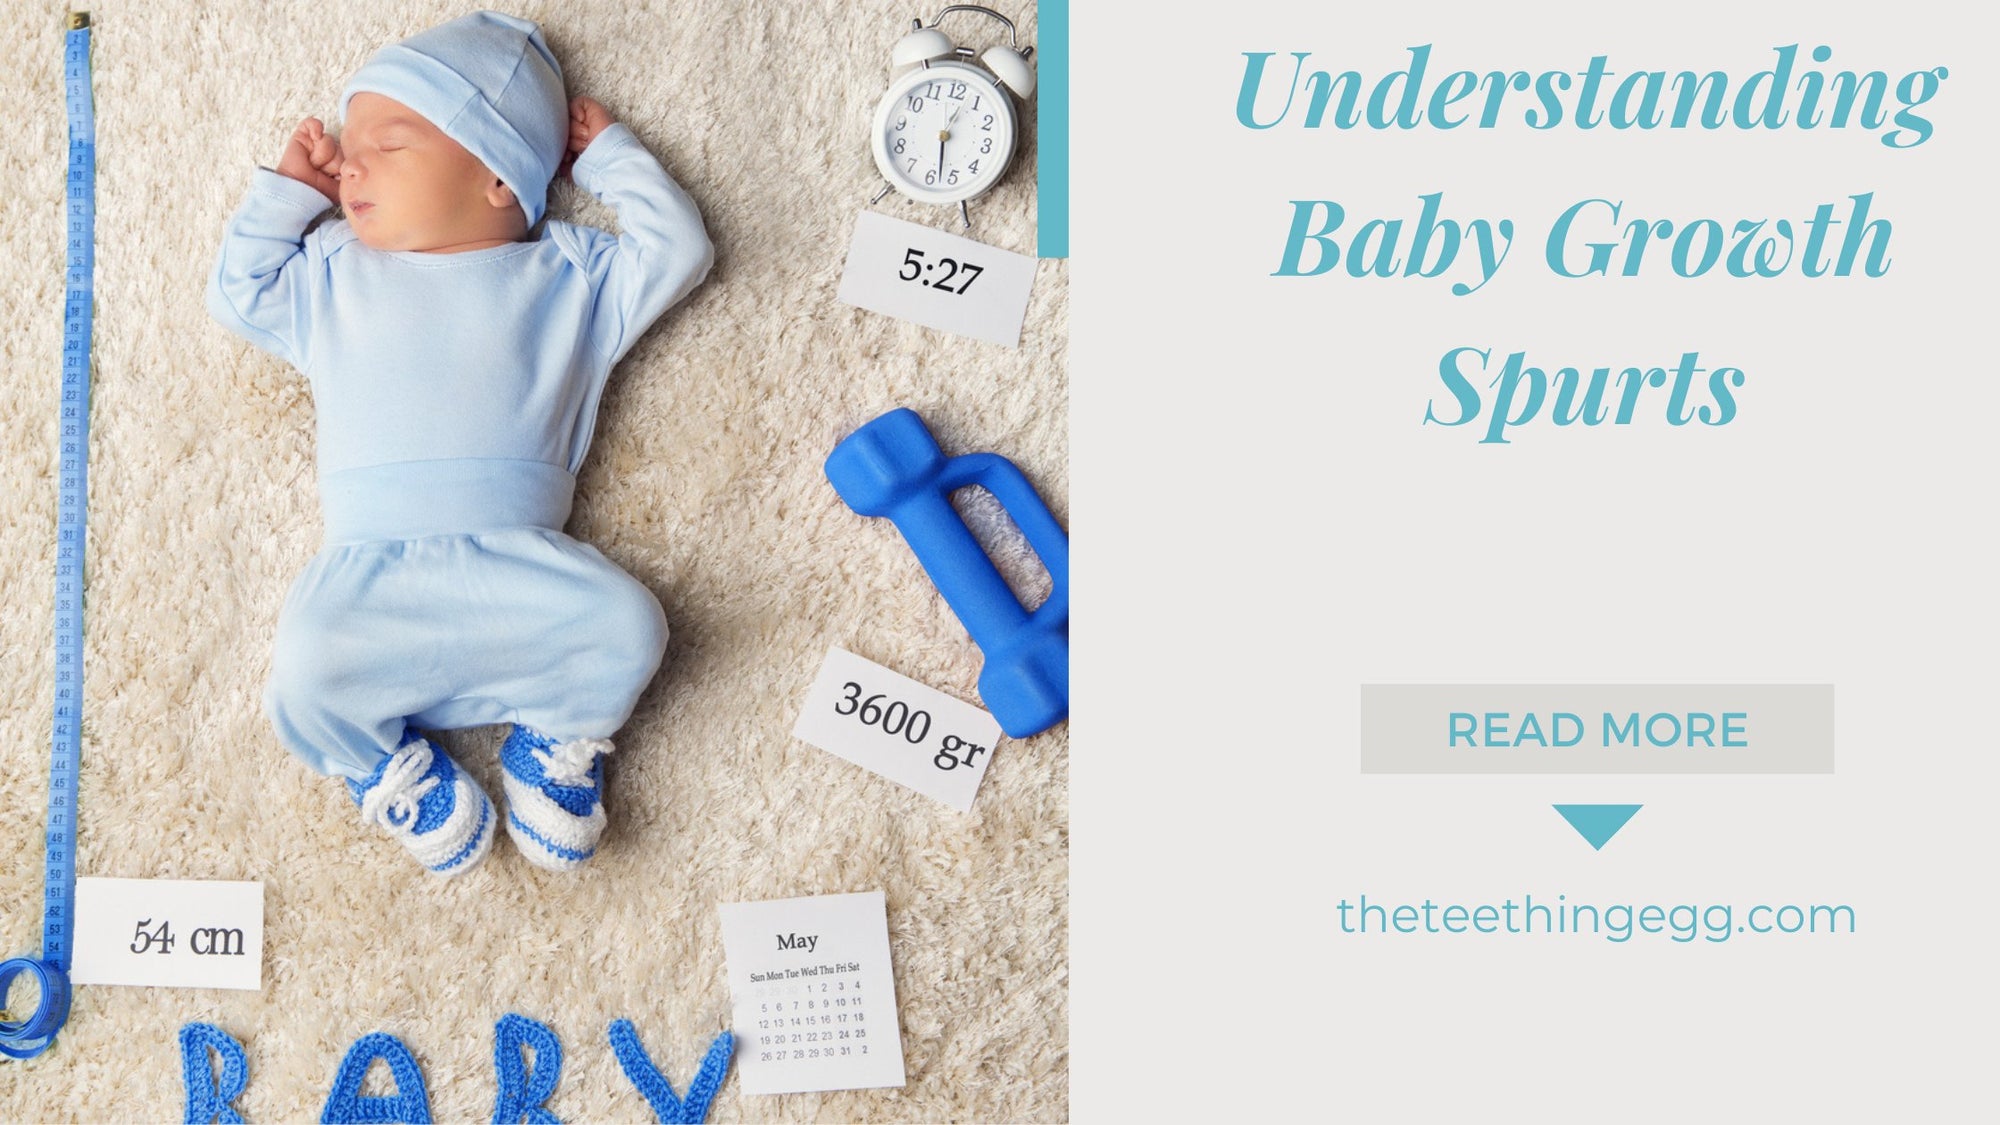 Could Your Baby Be Going Through A Growth Spurt? - Understanding Baby Growth Spurts